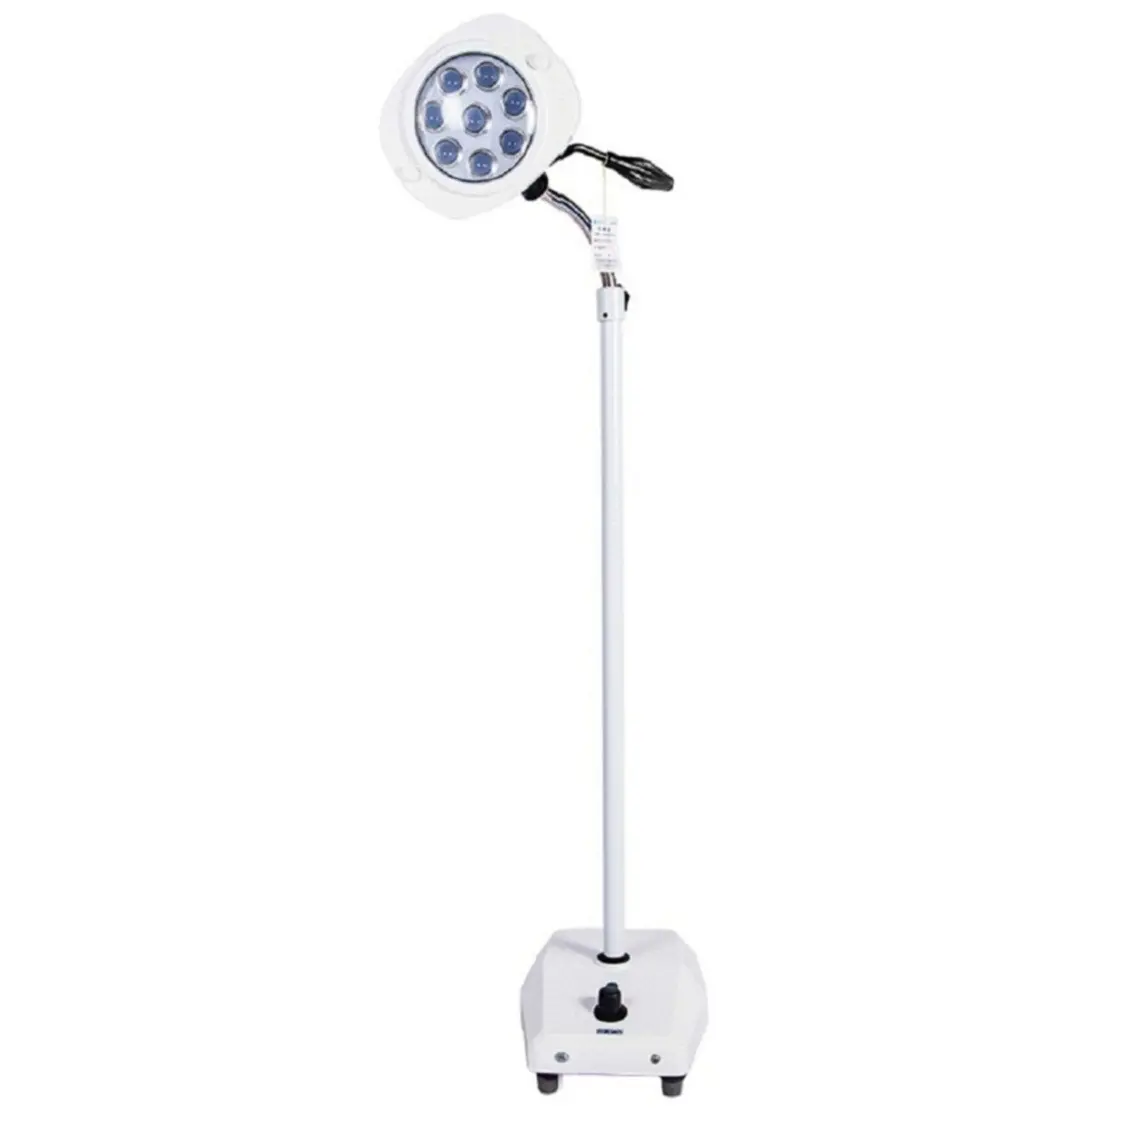 LED Operating Lamp 3500-5500K Examination Light Medical Suitable for Clinic